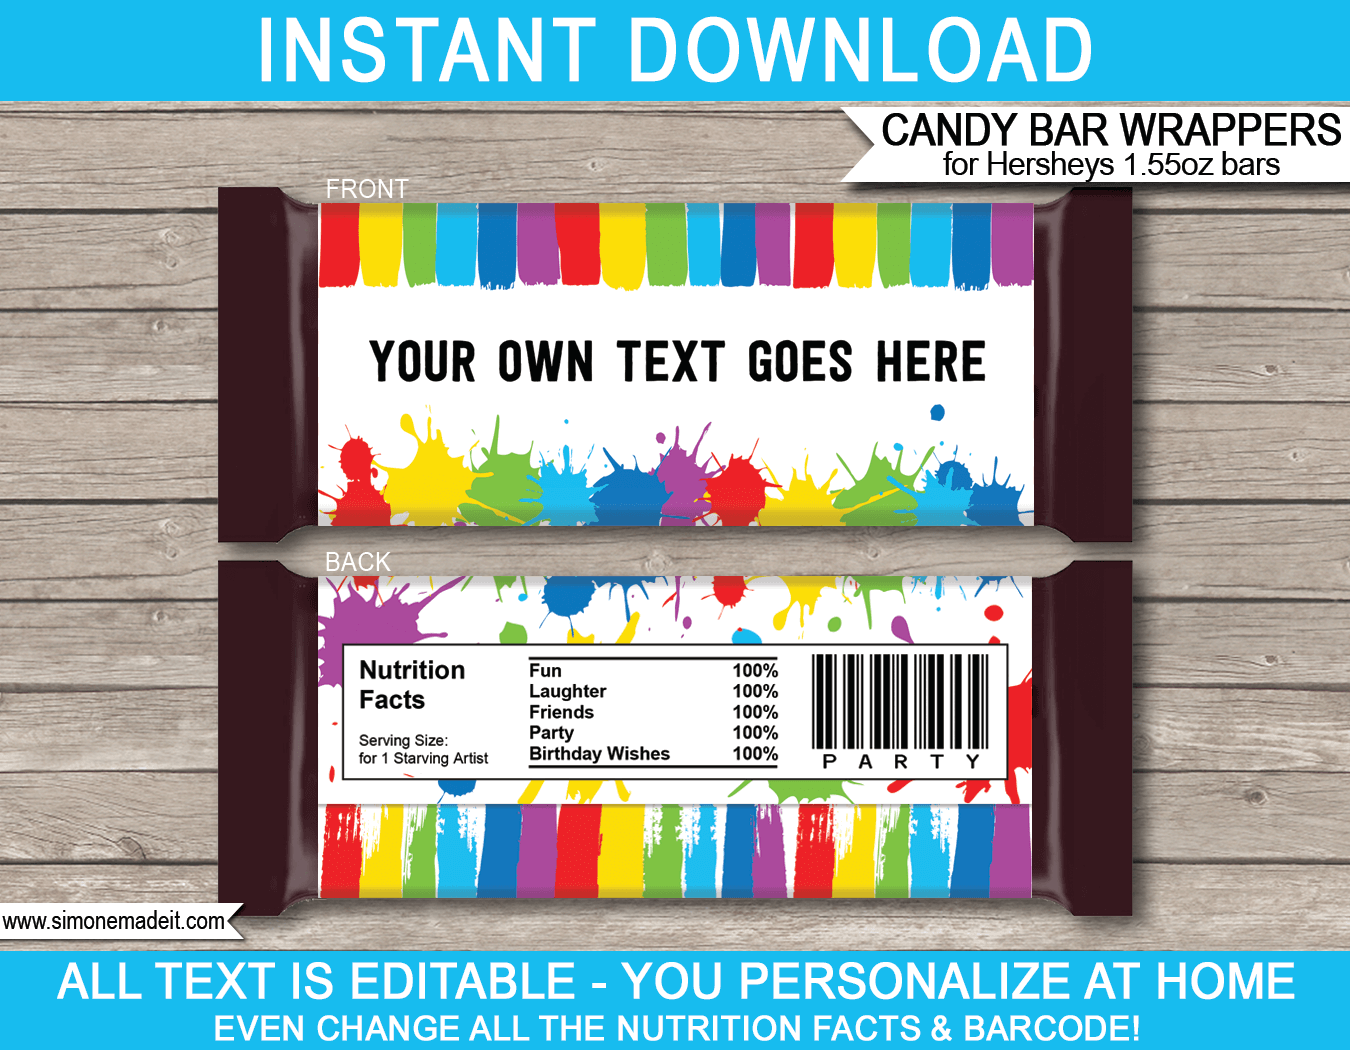 Art Party Hershey Candy Bar Wrappers | Birthday Party Favors | Personalized Candy Bars | Editable Template | INSTANT DOWNLOAD $3.00 via simonemadeit.com